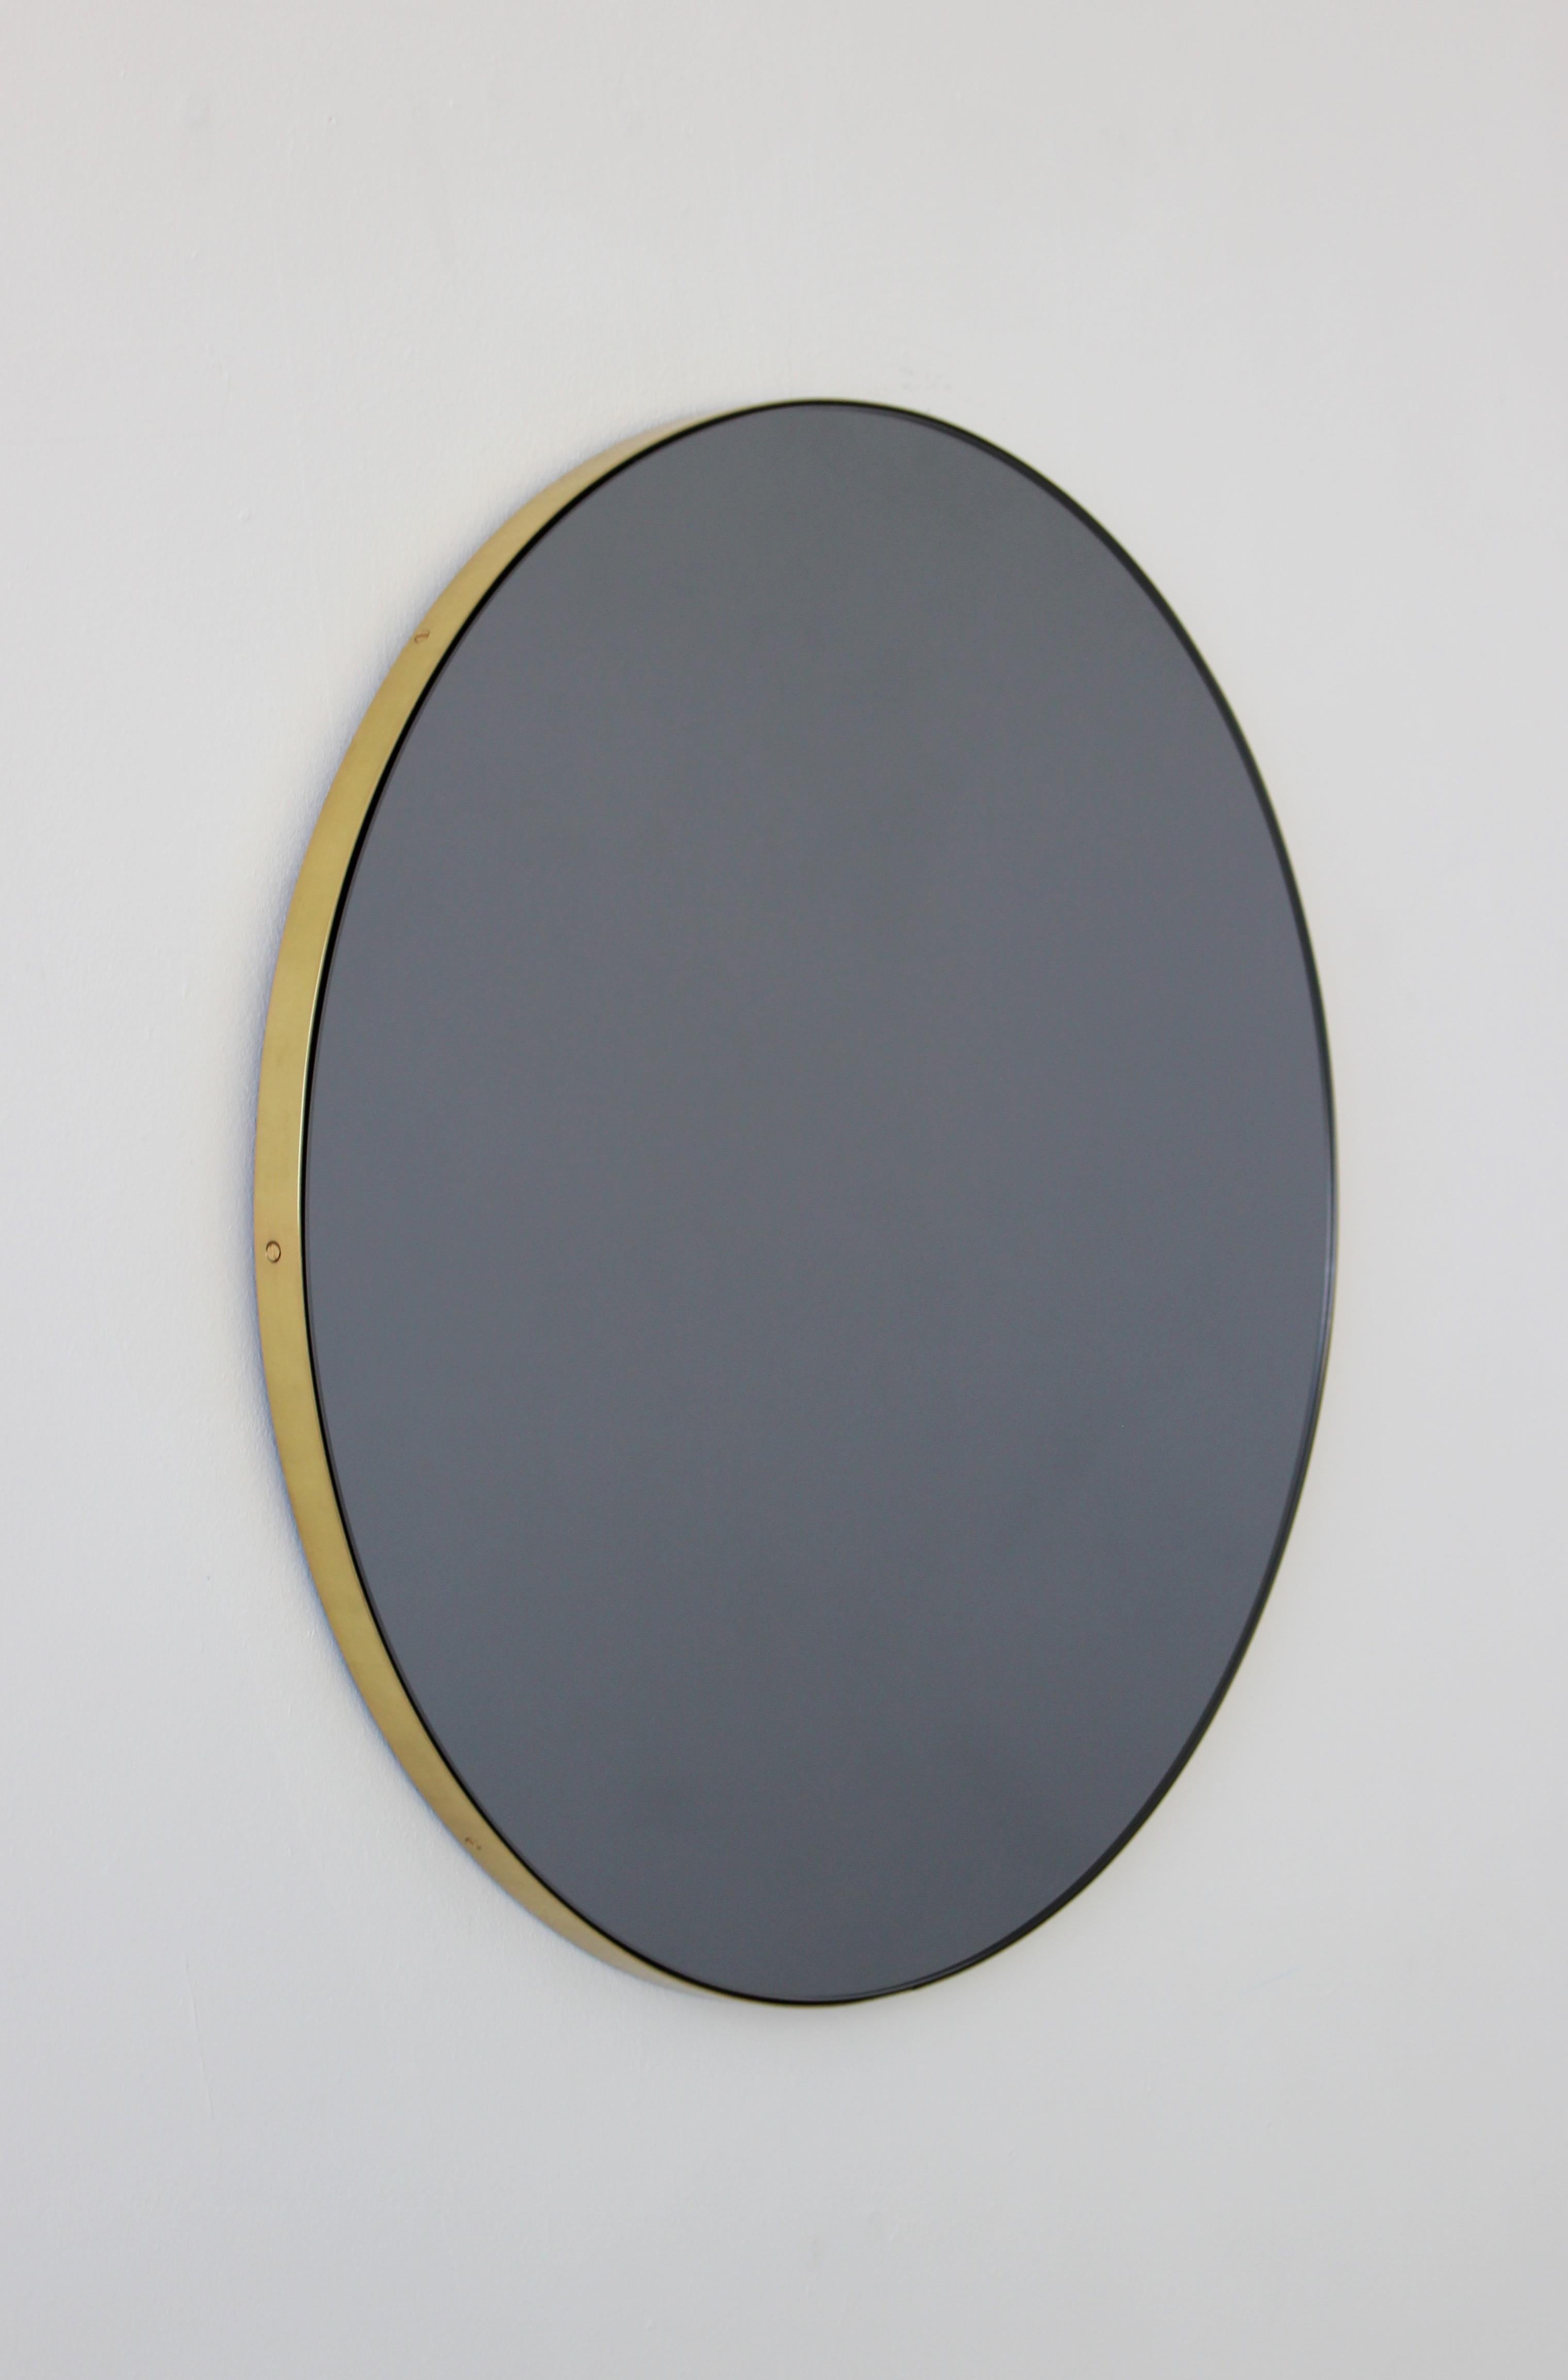 Orbis Black Tinted Round Modern Handcrafted Mirror with a Brass Frame, Regular For Sale 2